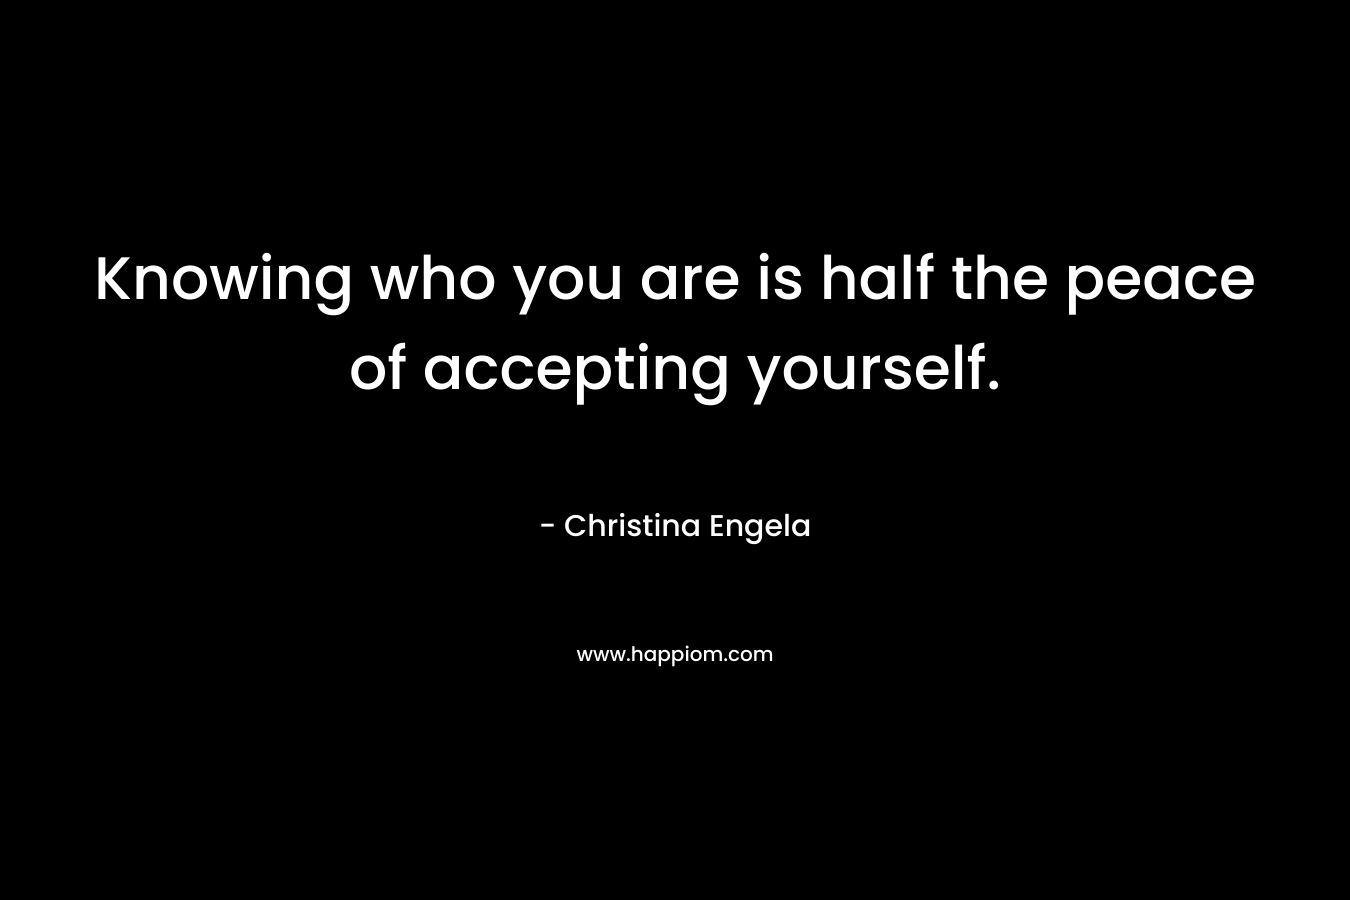 Knowing who you are is half the peace of accepting yourself.